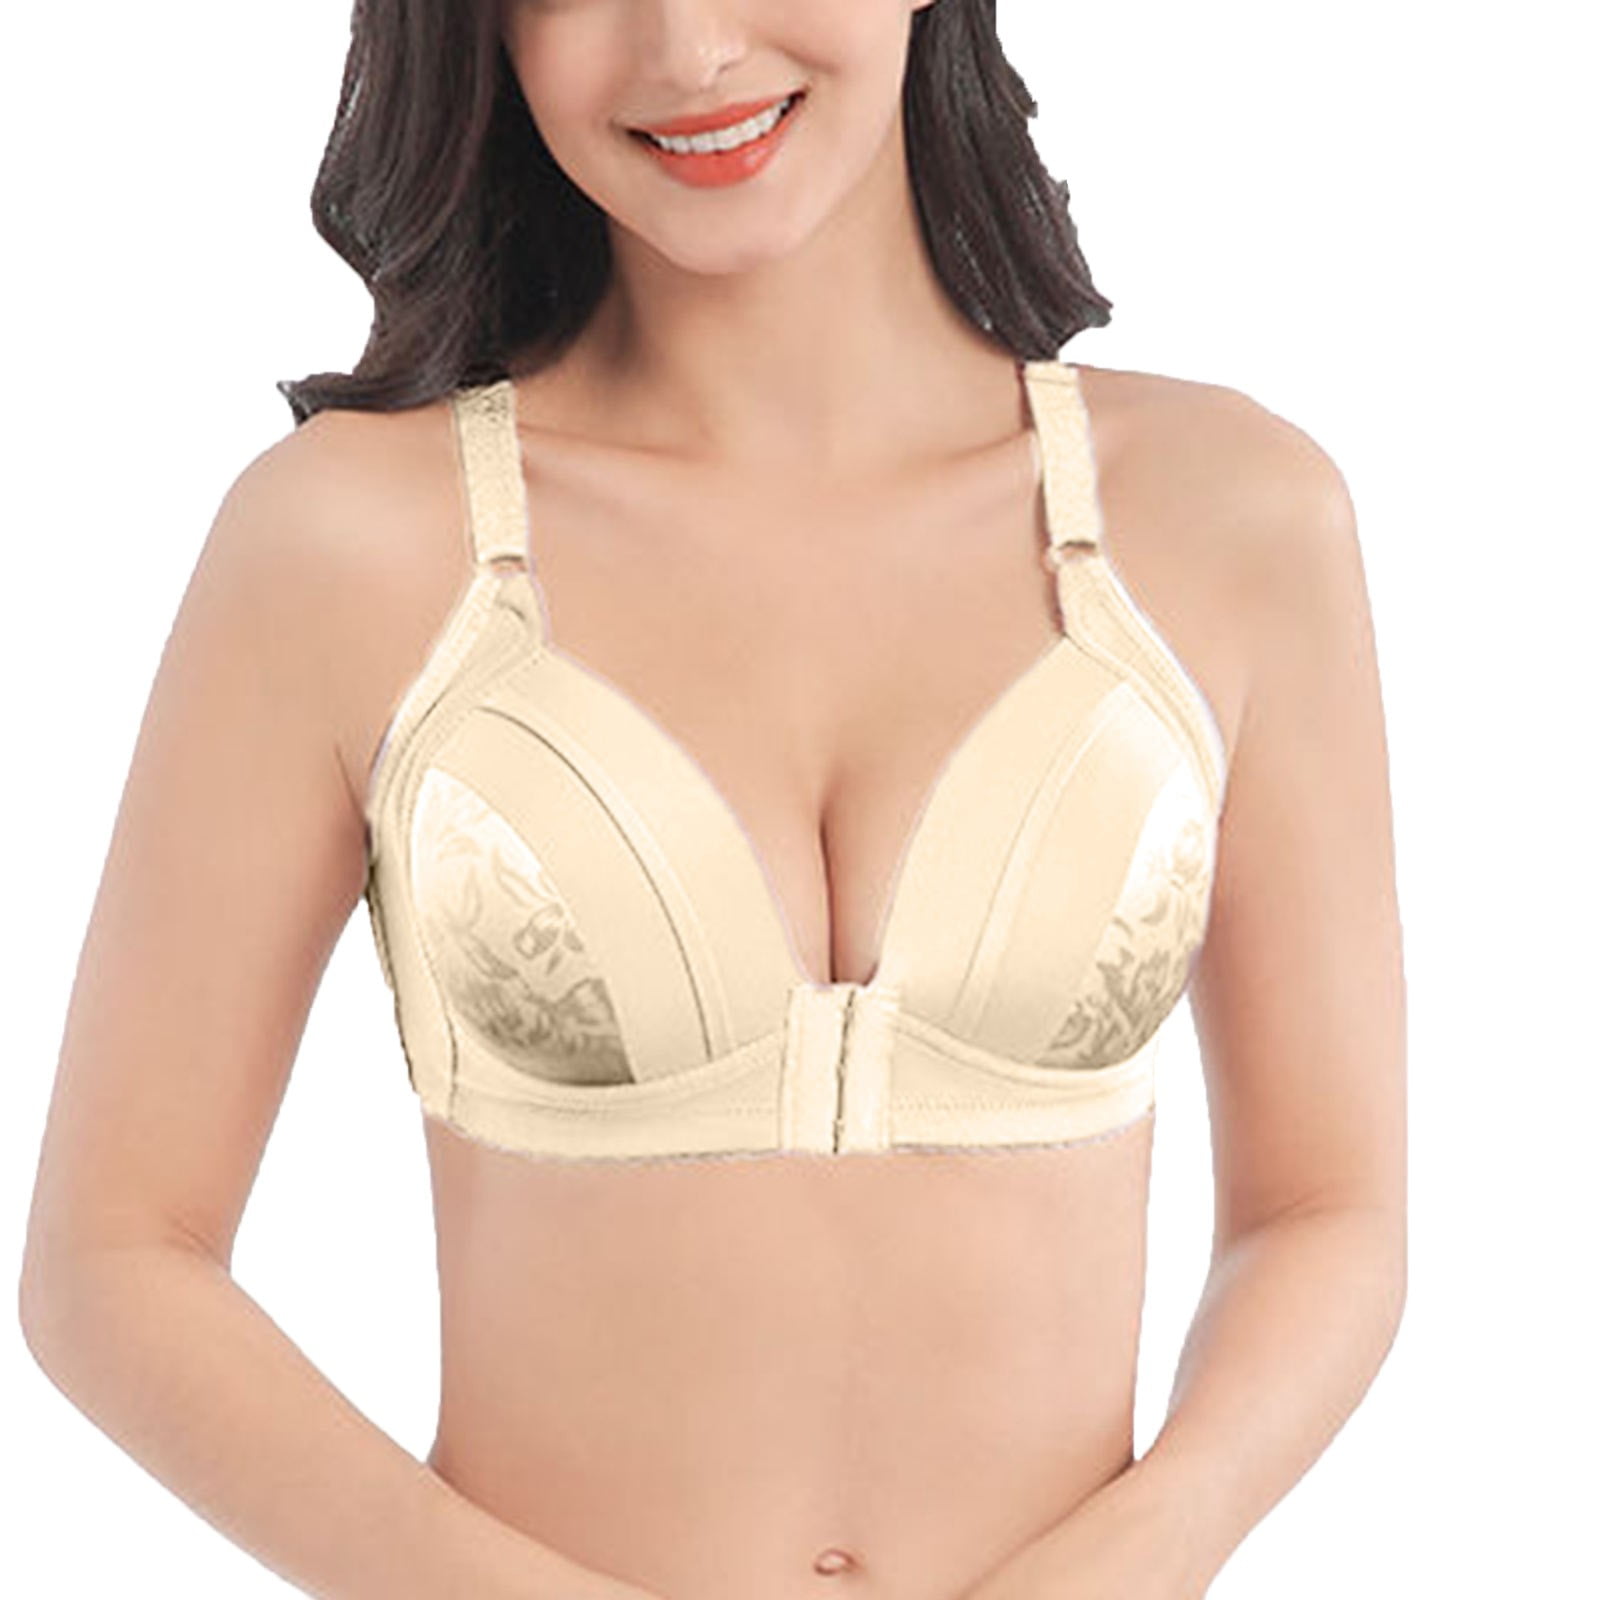 4KAYS all that matters! Womens Non Padded Cotton Front Open Bra  Front-Closure Everyday Wear Design Women Everyday Non Padded Bra - Buy  4KAYS all that matters! Womens Non Padded Cotton Front Open